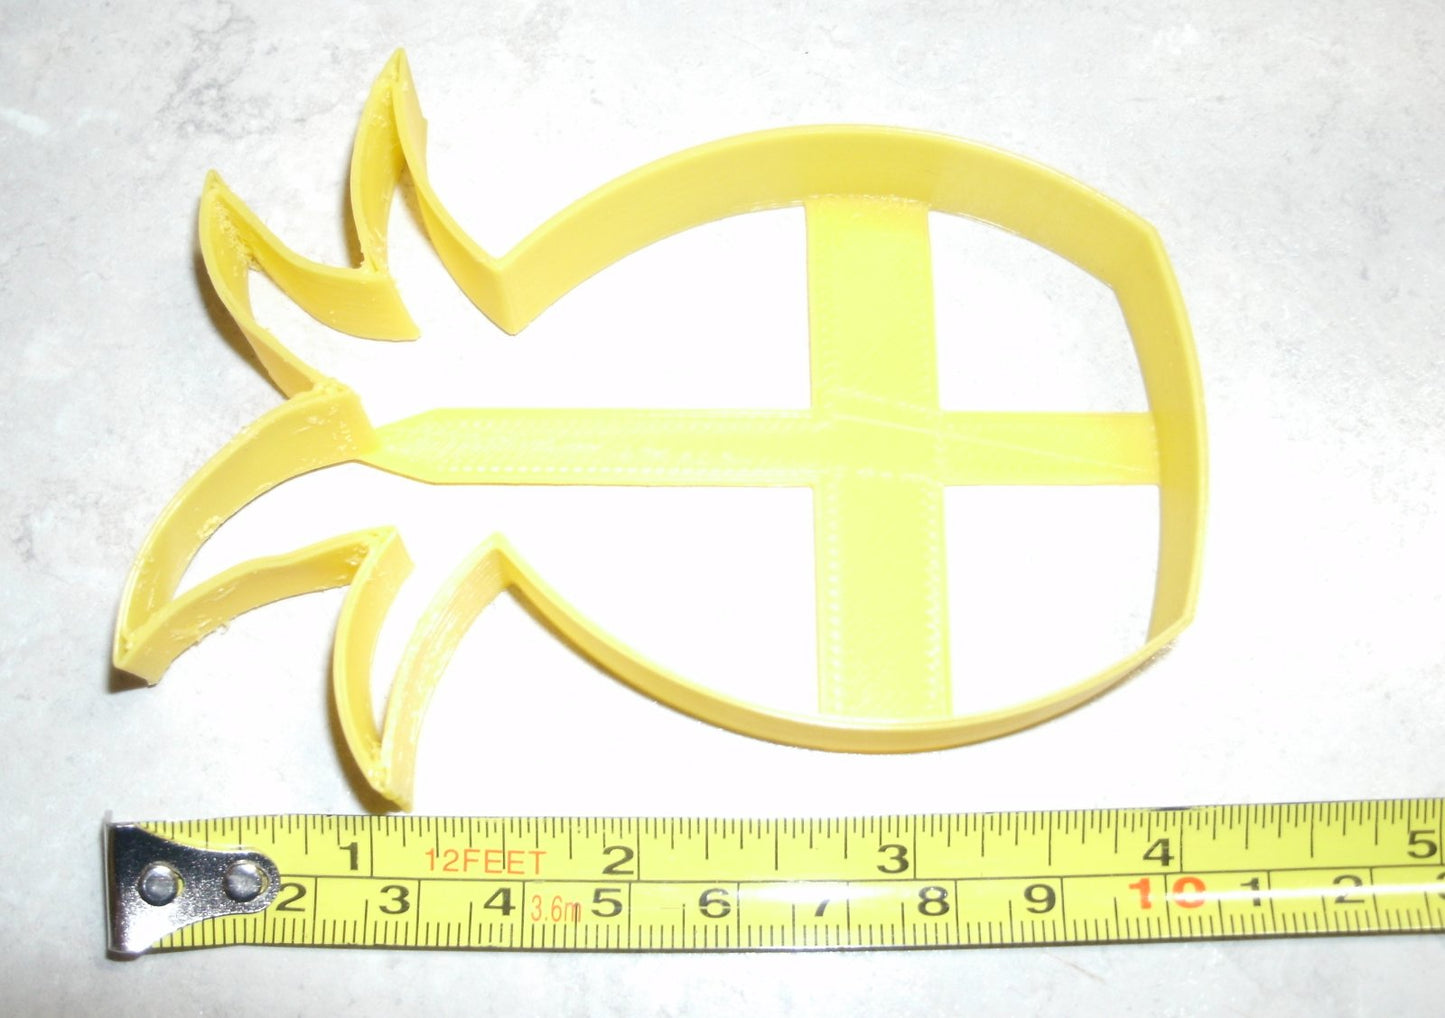 Pineapple Tropical Fruit Special Occasion Cookie Cutter Made in USA PR690